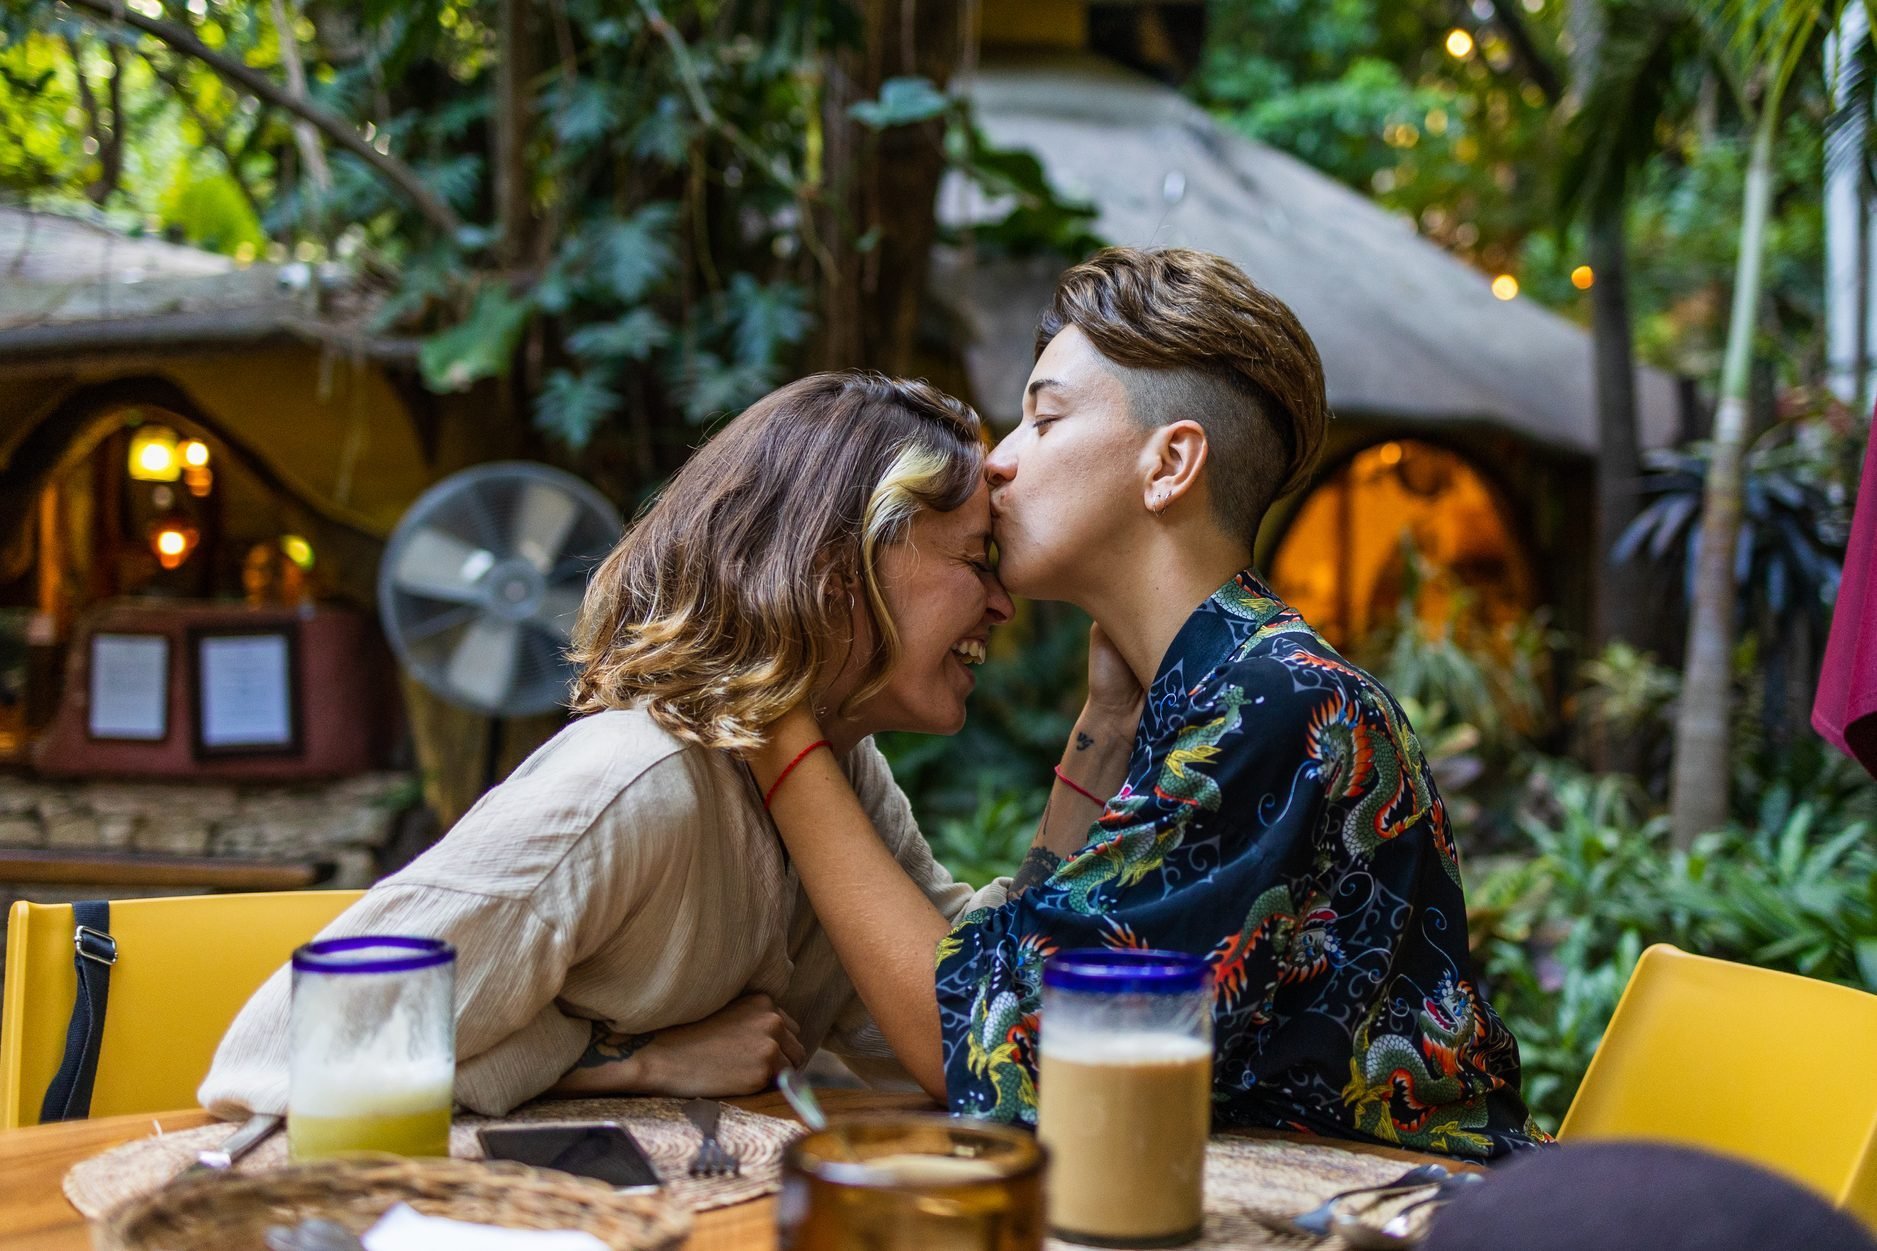 50 Romantic Date Ideas That Spark (or Strengthen) a Meaningful Connection